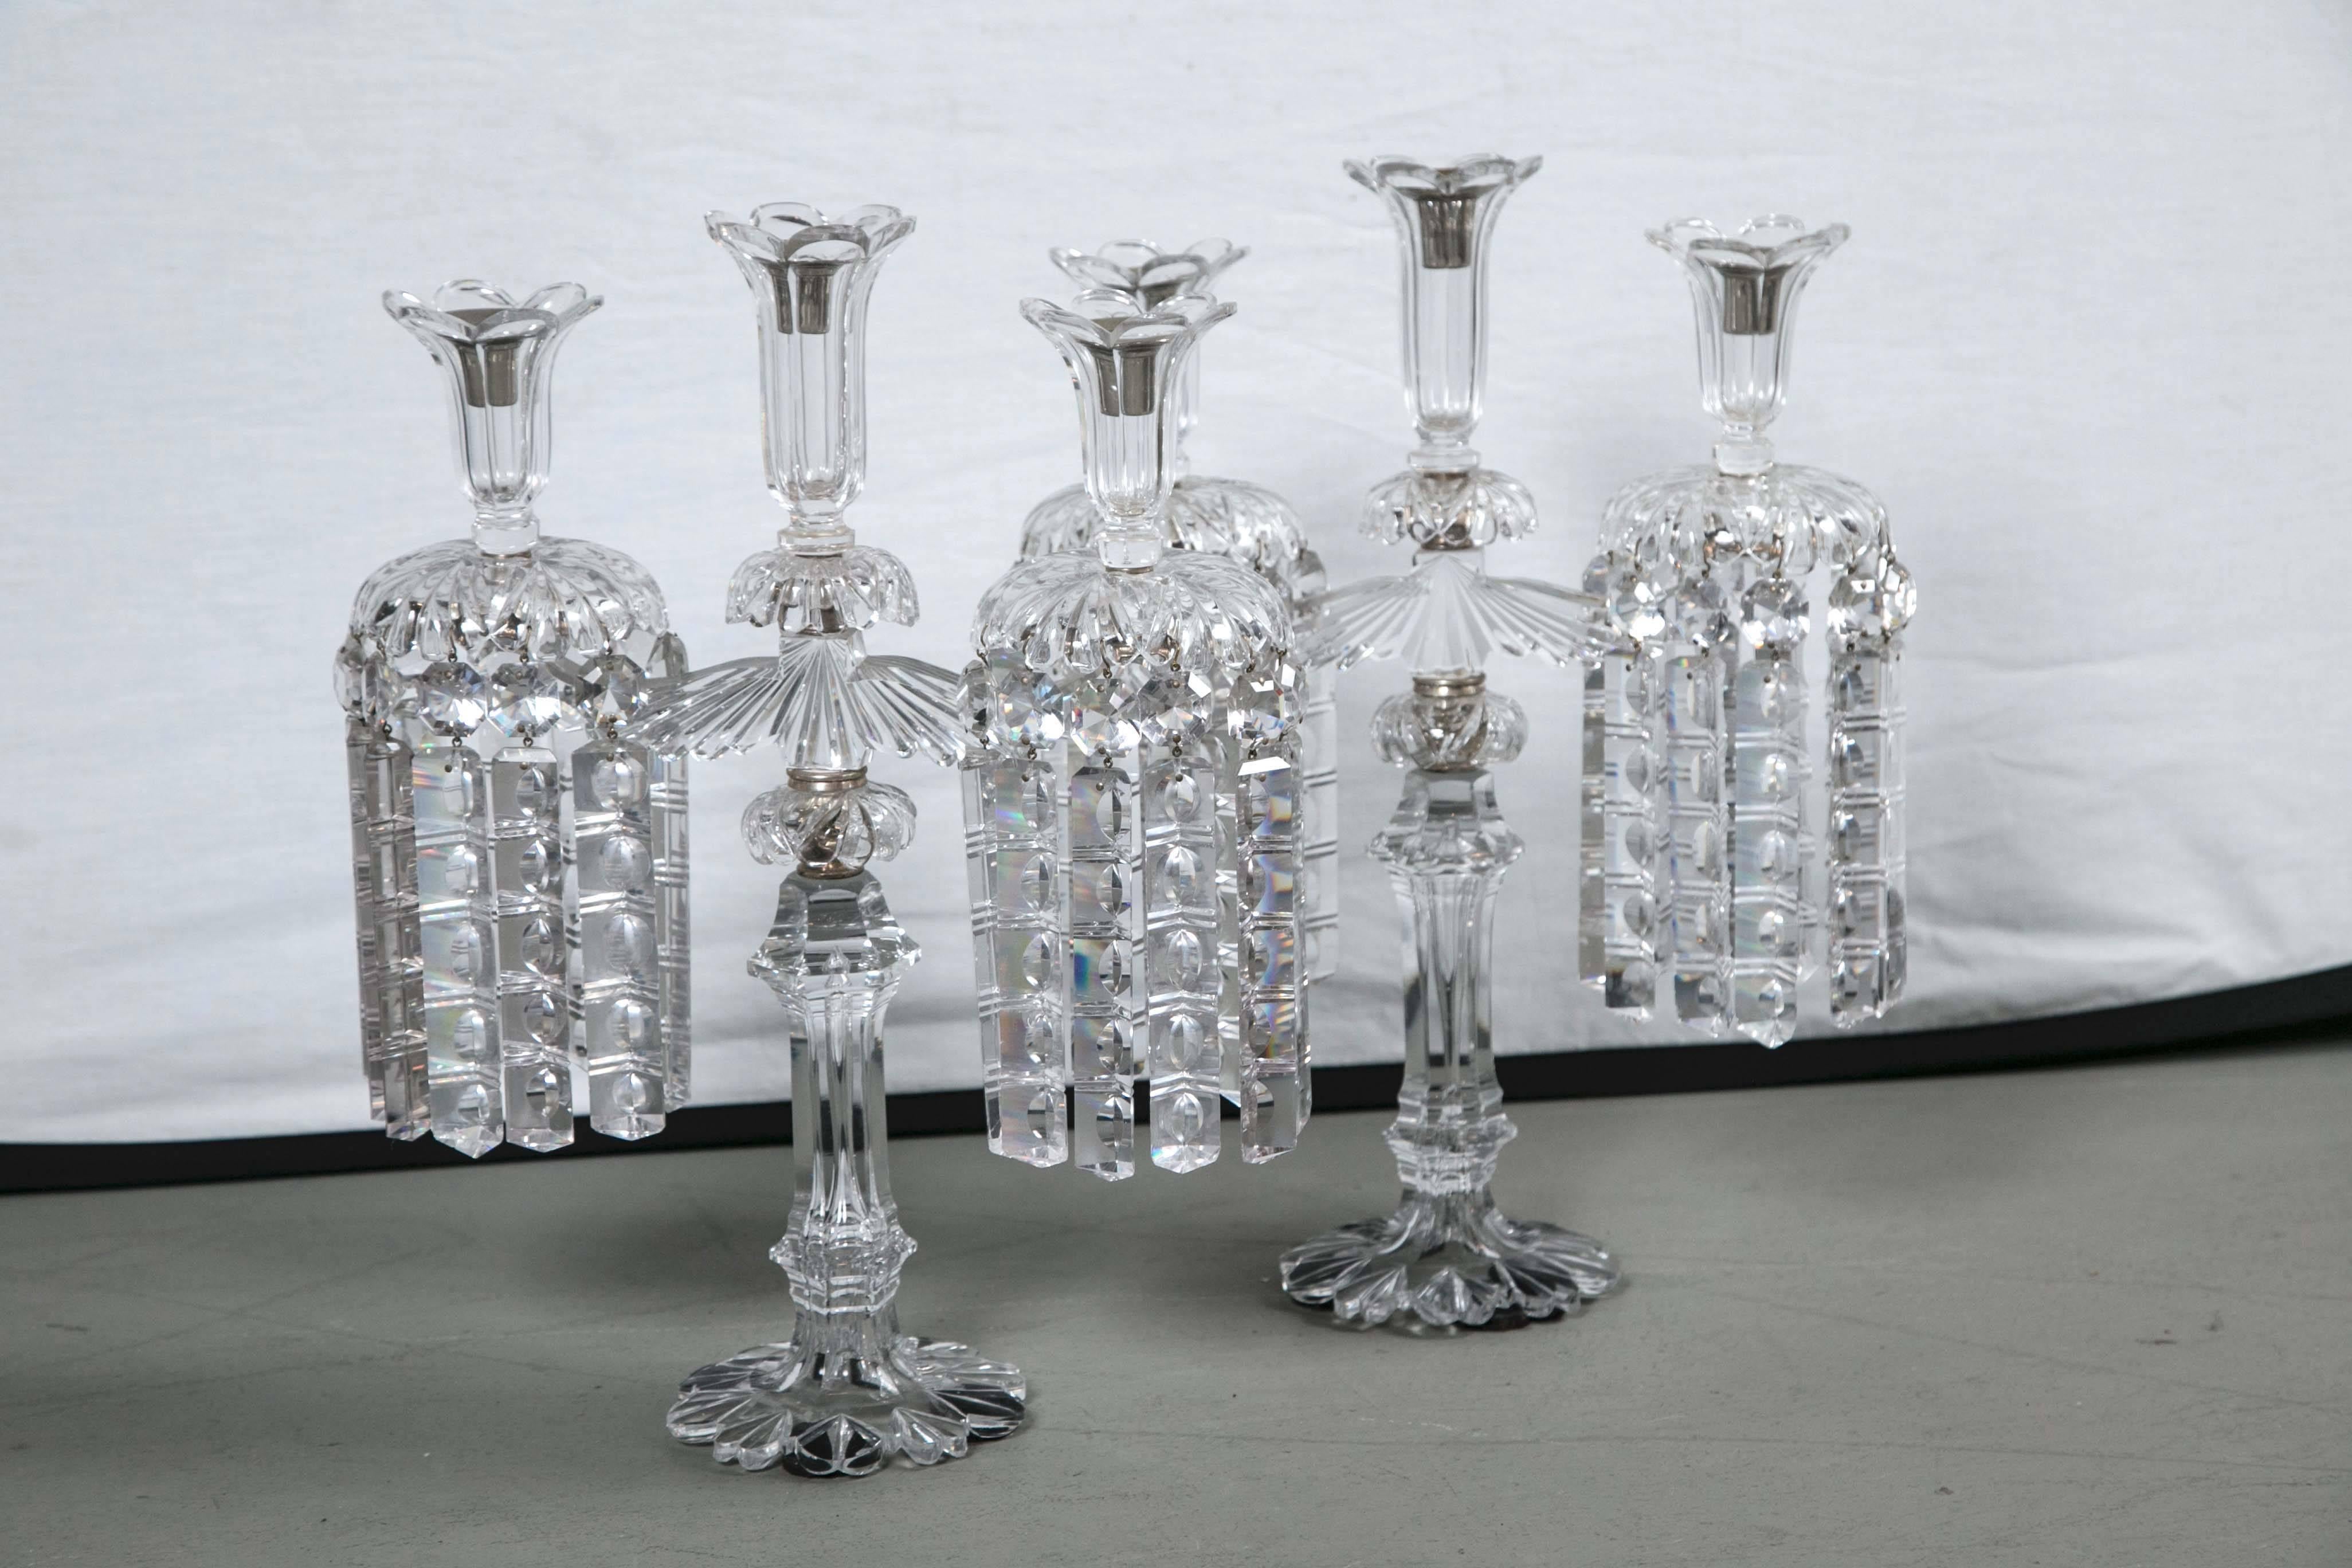 Attributed to Waterford this pair of candleholders is stunning and capture the turn of the century elegance.